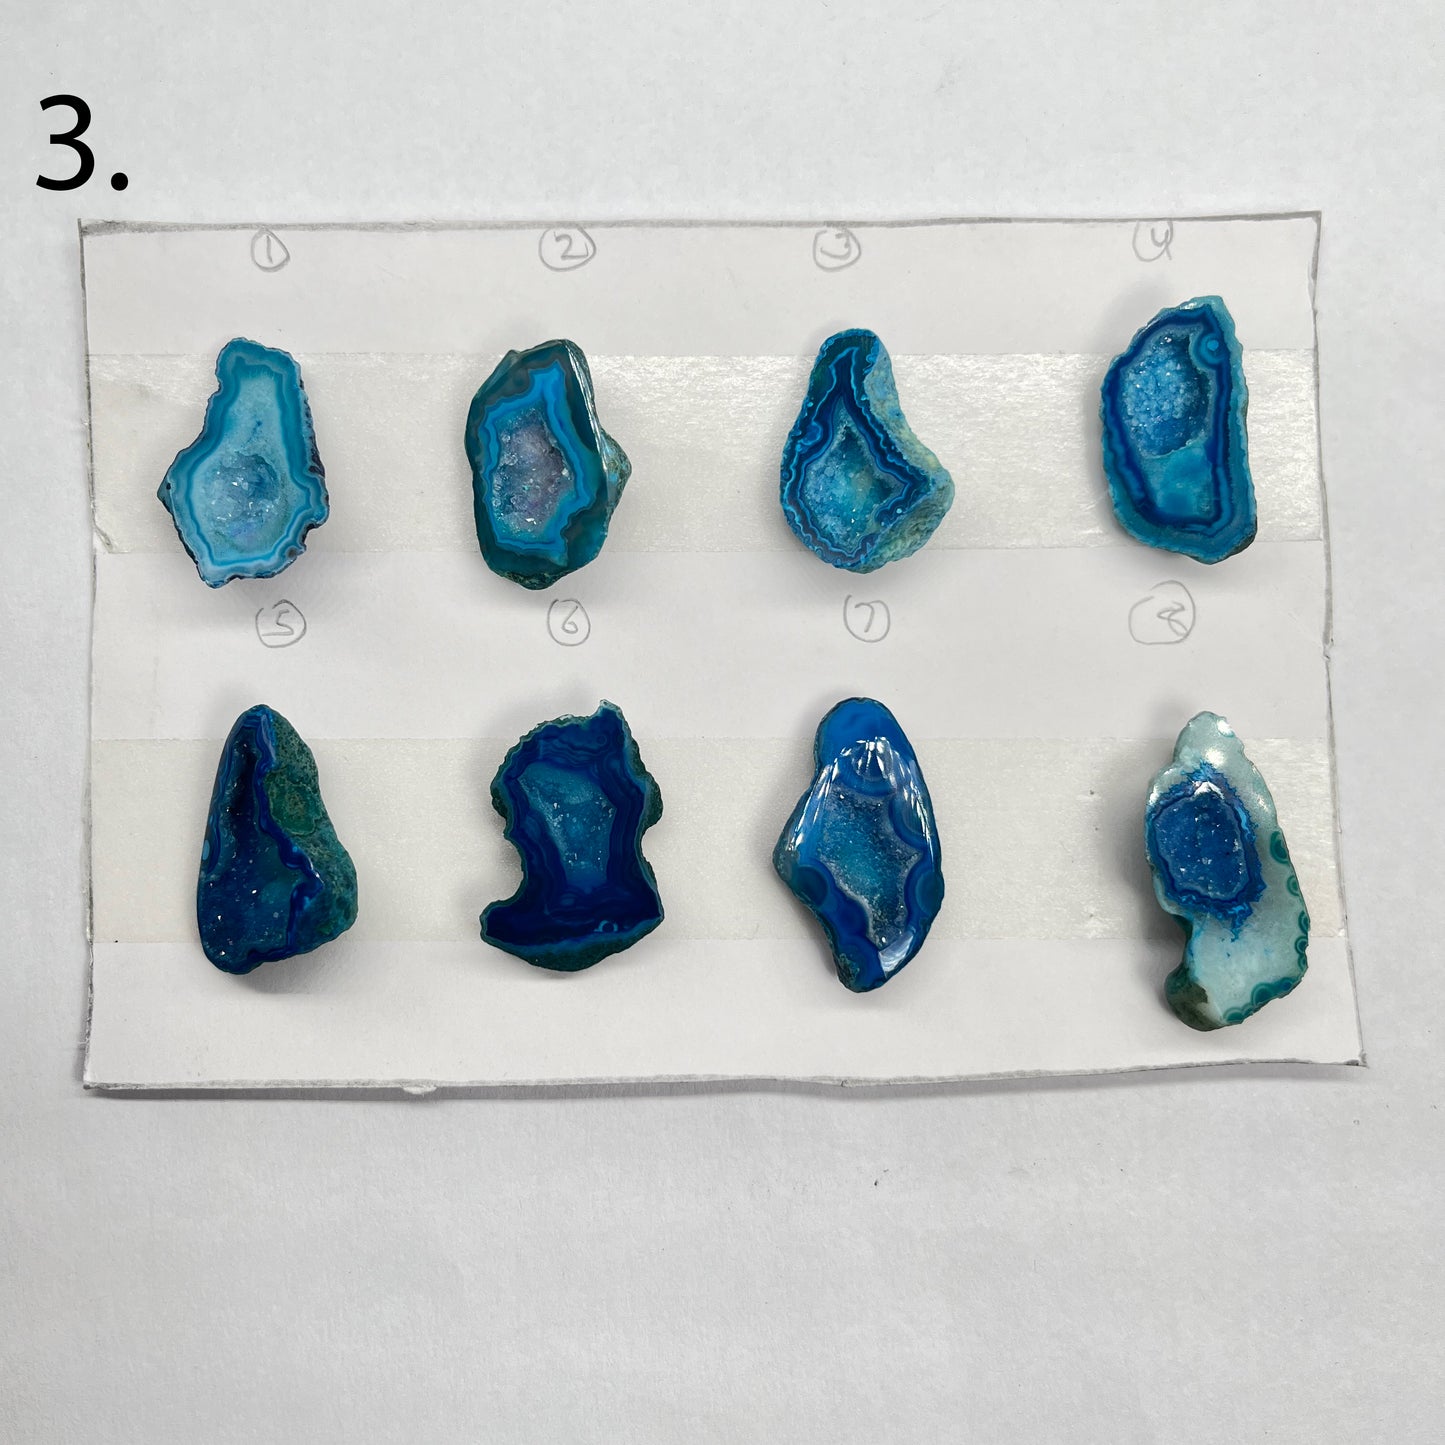 Geode Pendant stone by Selection 25 - 35MM Aqua